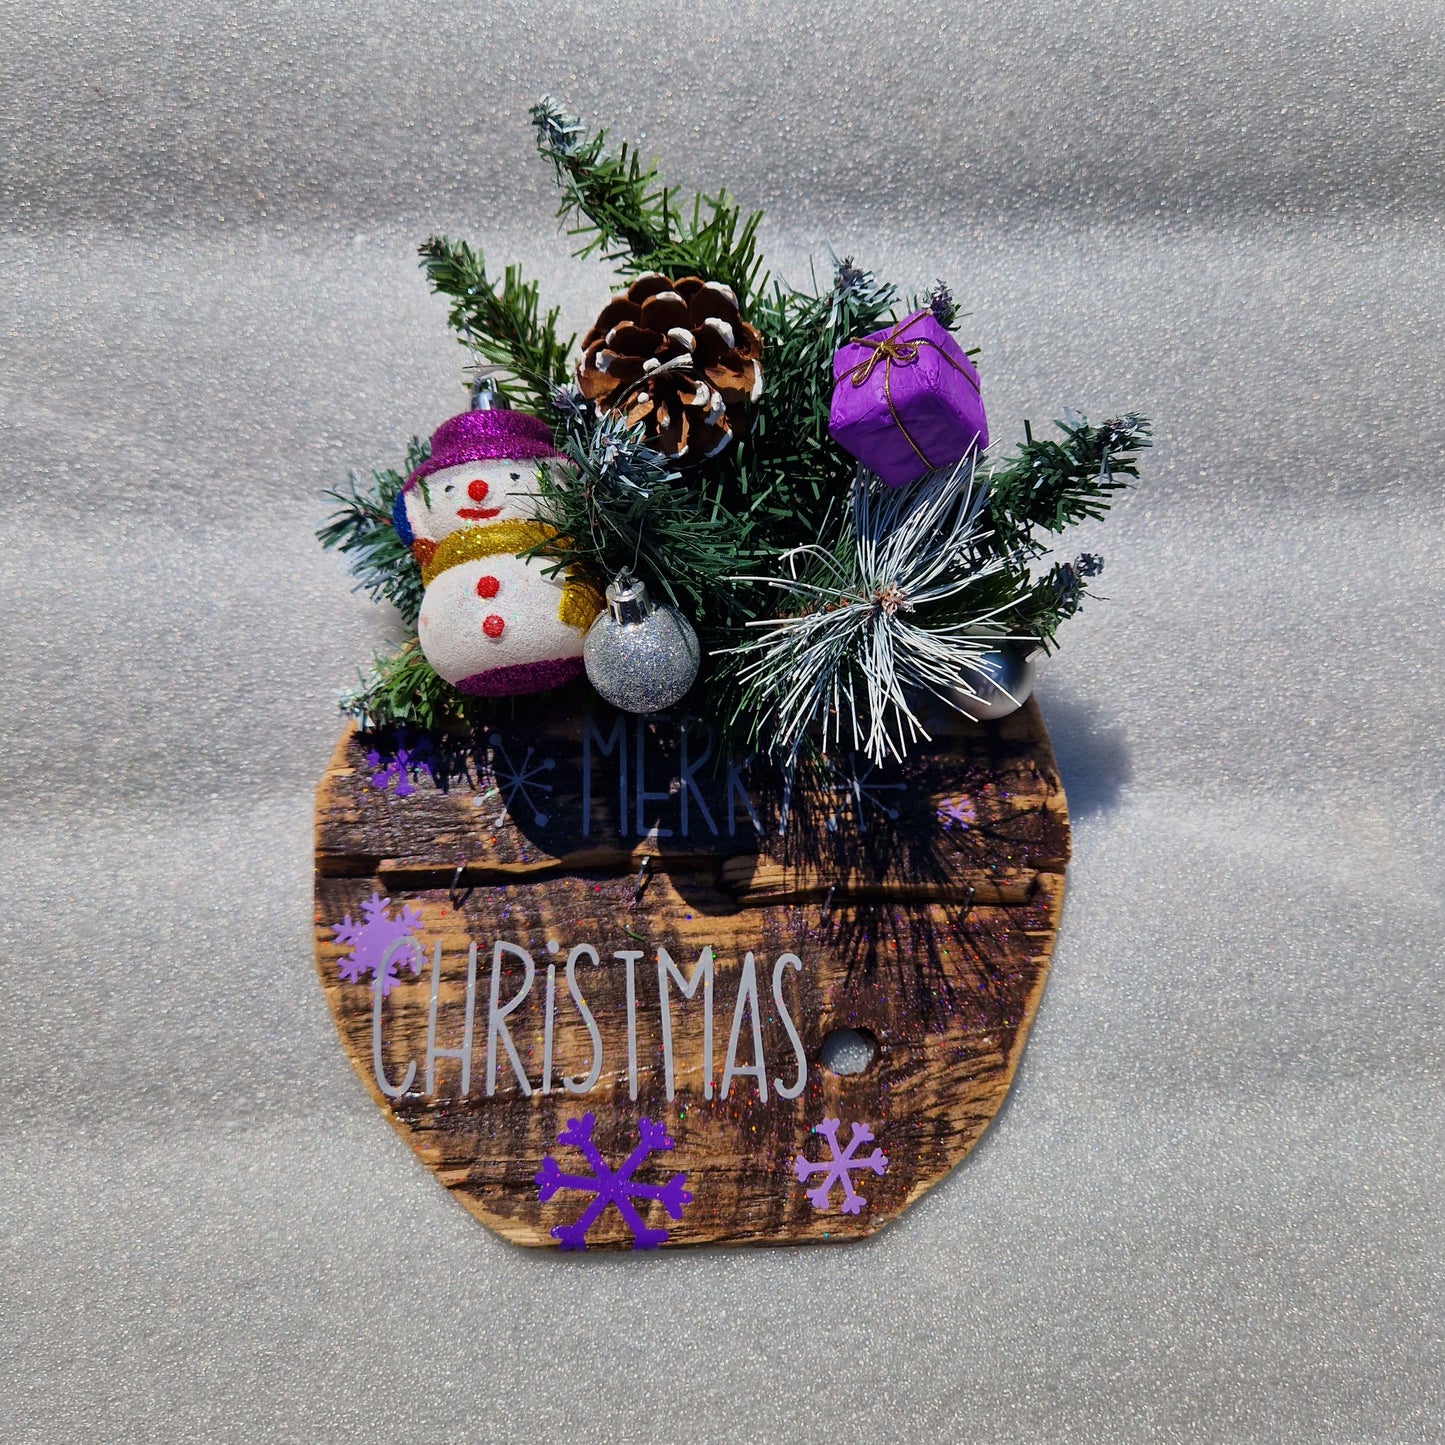 merry christmas wooden sign silver and purple christmas decor rustic